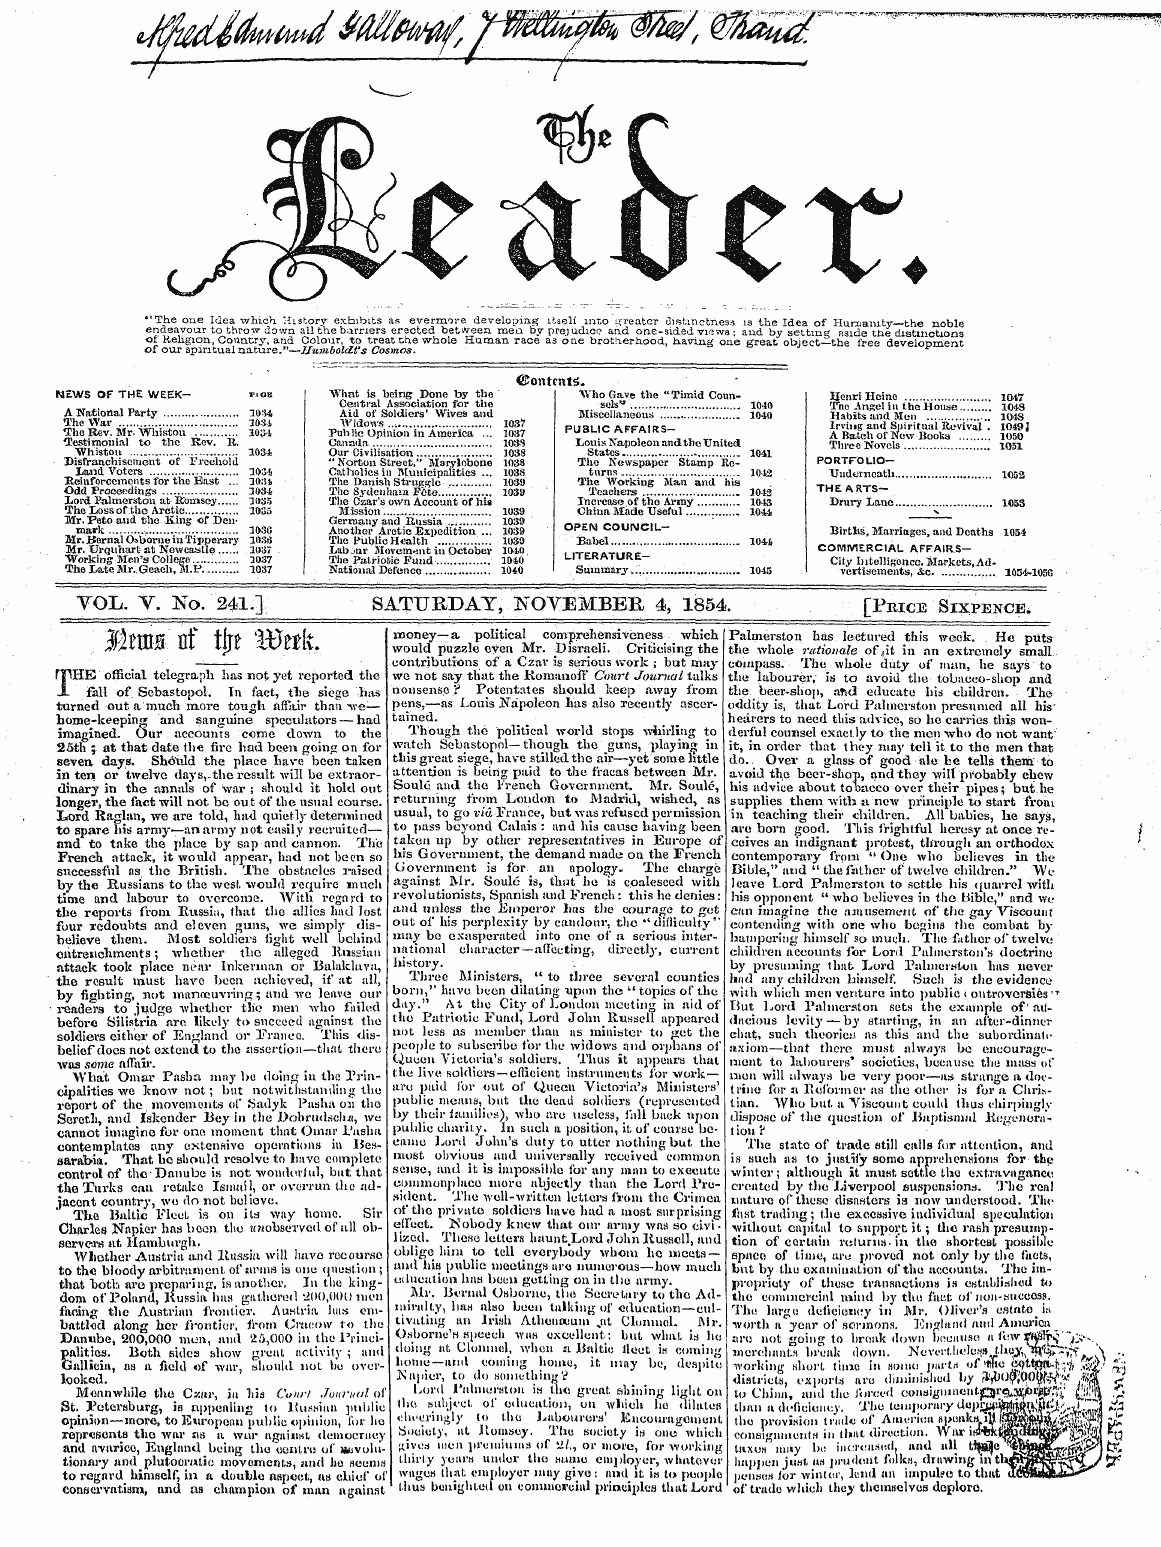 Leader (1850-1860): jS F Y, Country edition - / " ¦ I ~^